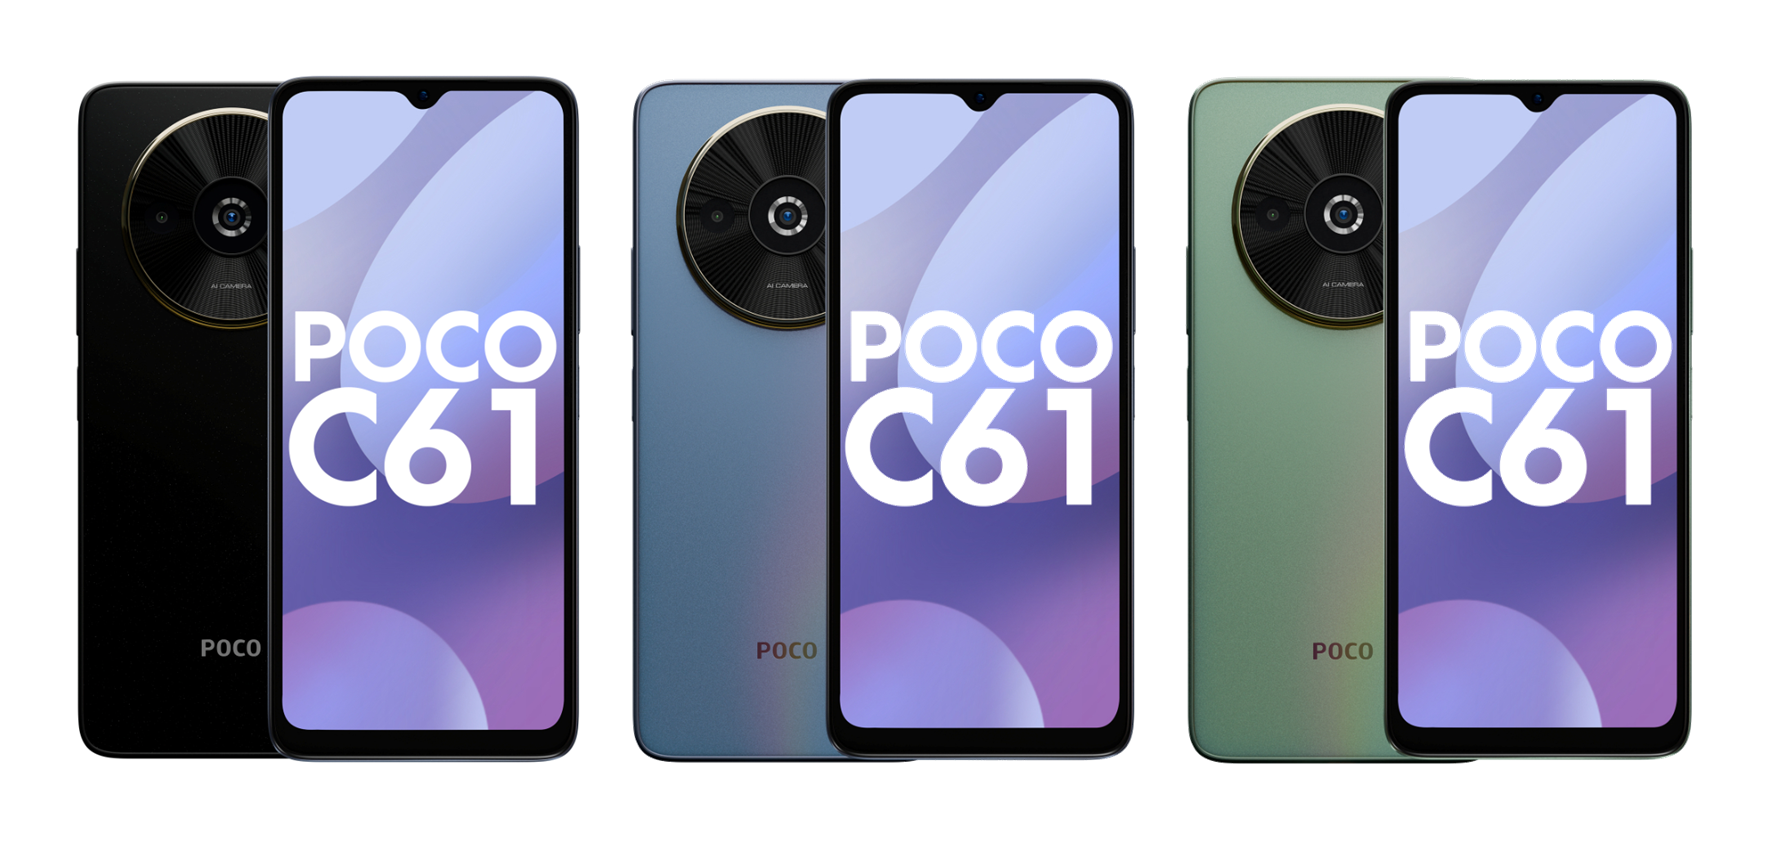 90Hz LCD display, MediaTek Helio G36 chip and dual camera: images and details of POCO C61 smartphone have surfaced online